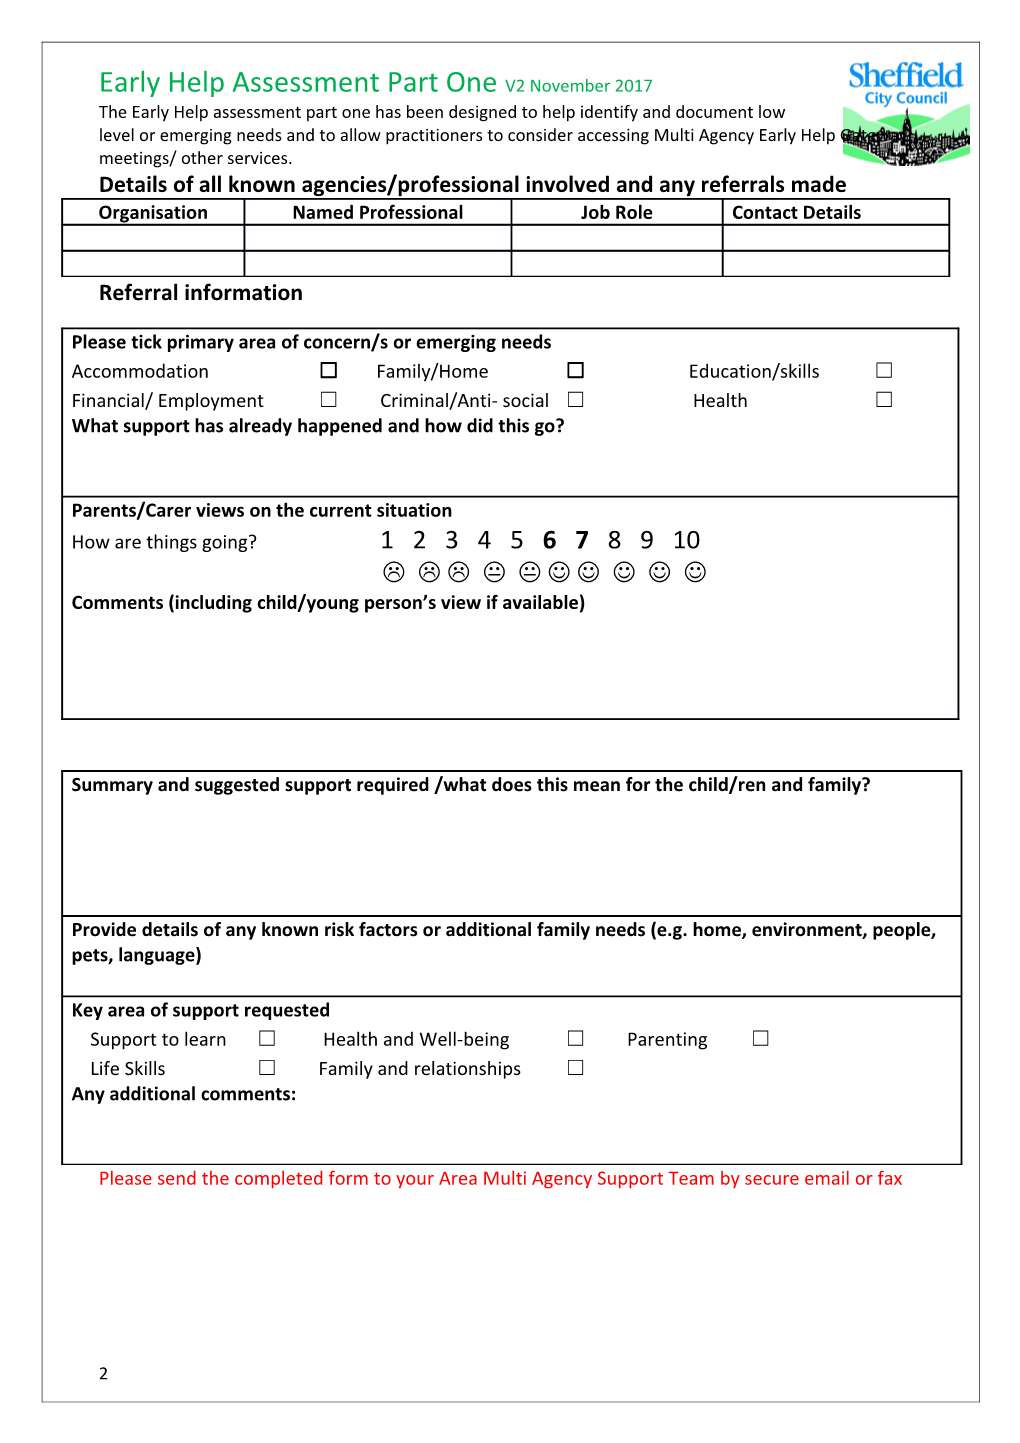 The Early Help Assessment Part Onehas Been Designed to Help Identify and Document Low